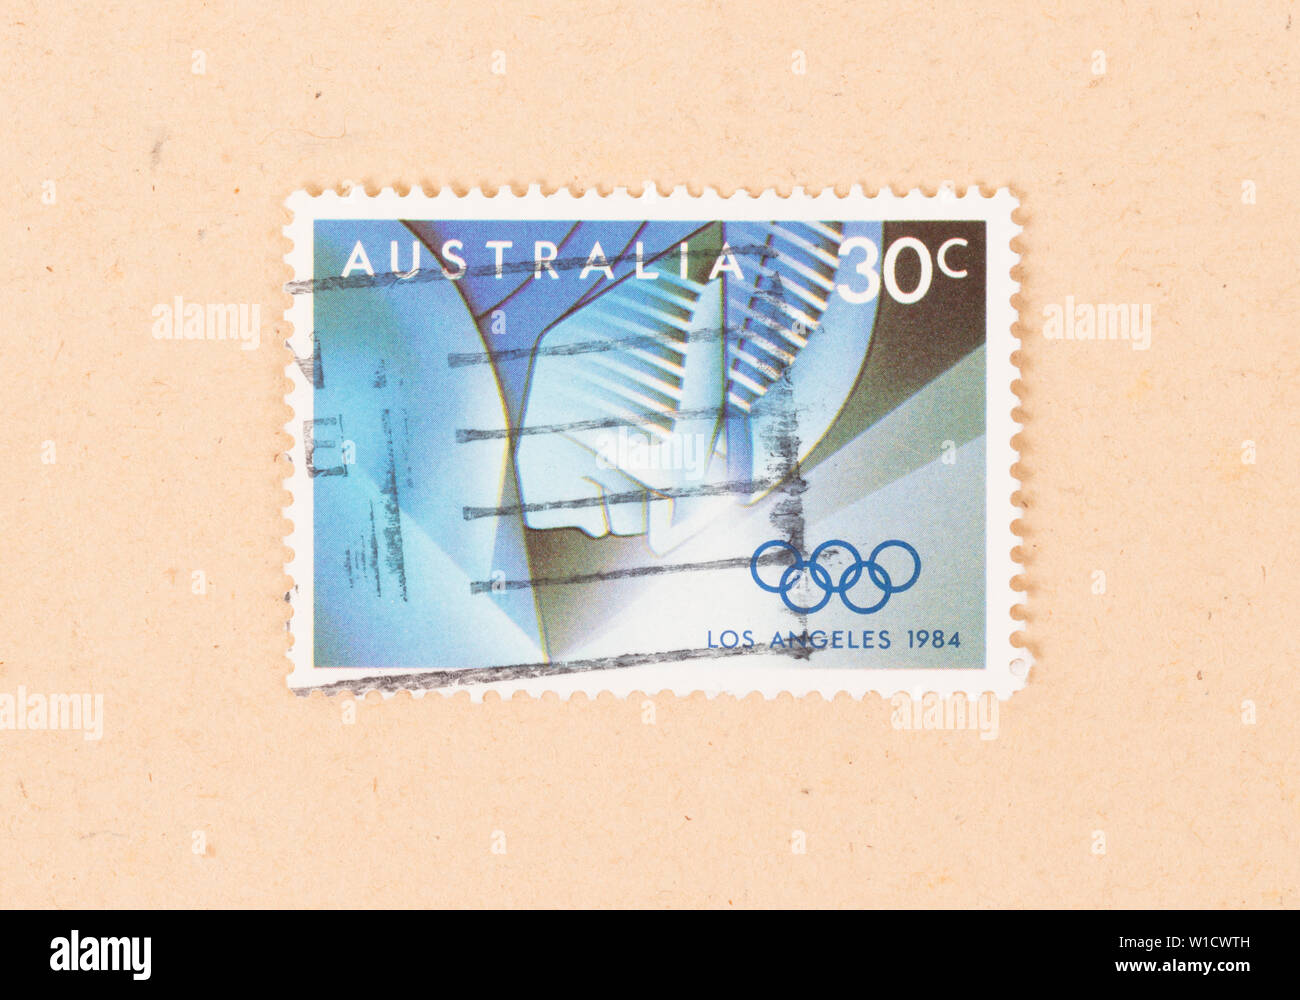 AUSTRALIA - CIRCA 1984: A stamp printed in Australia shows the Los Angeles Olympic games, circa 1984 Stock Photo